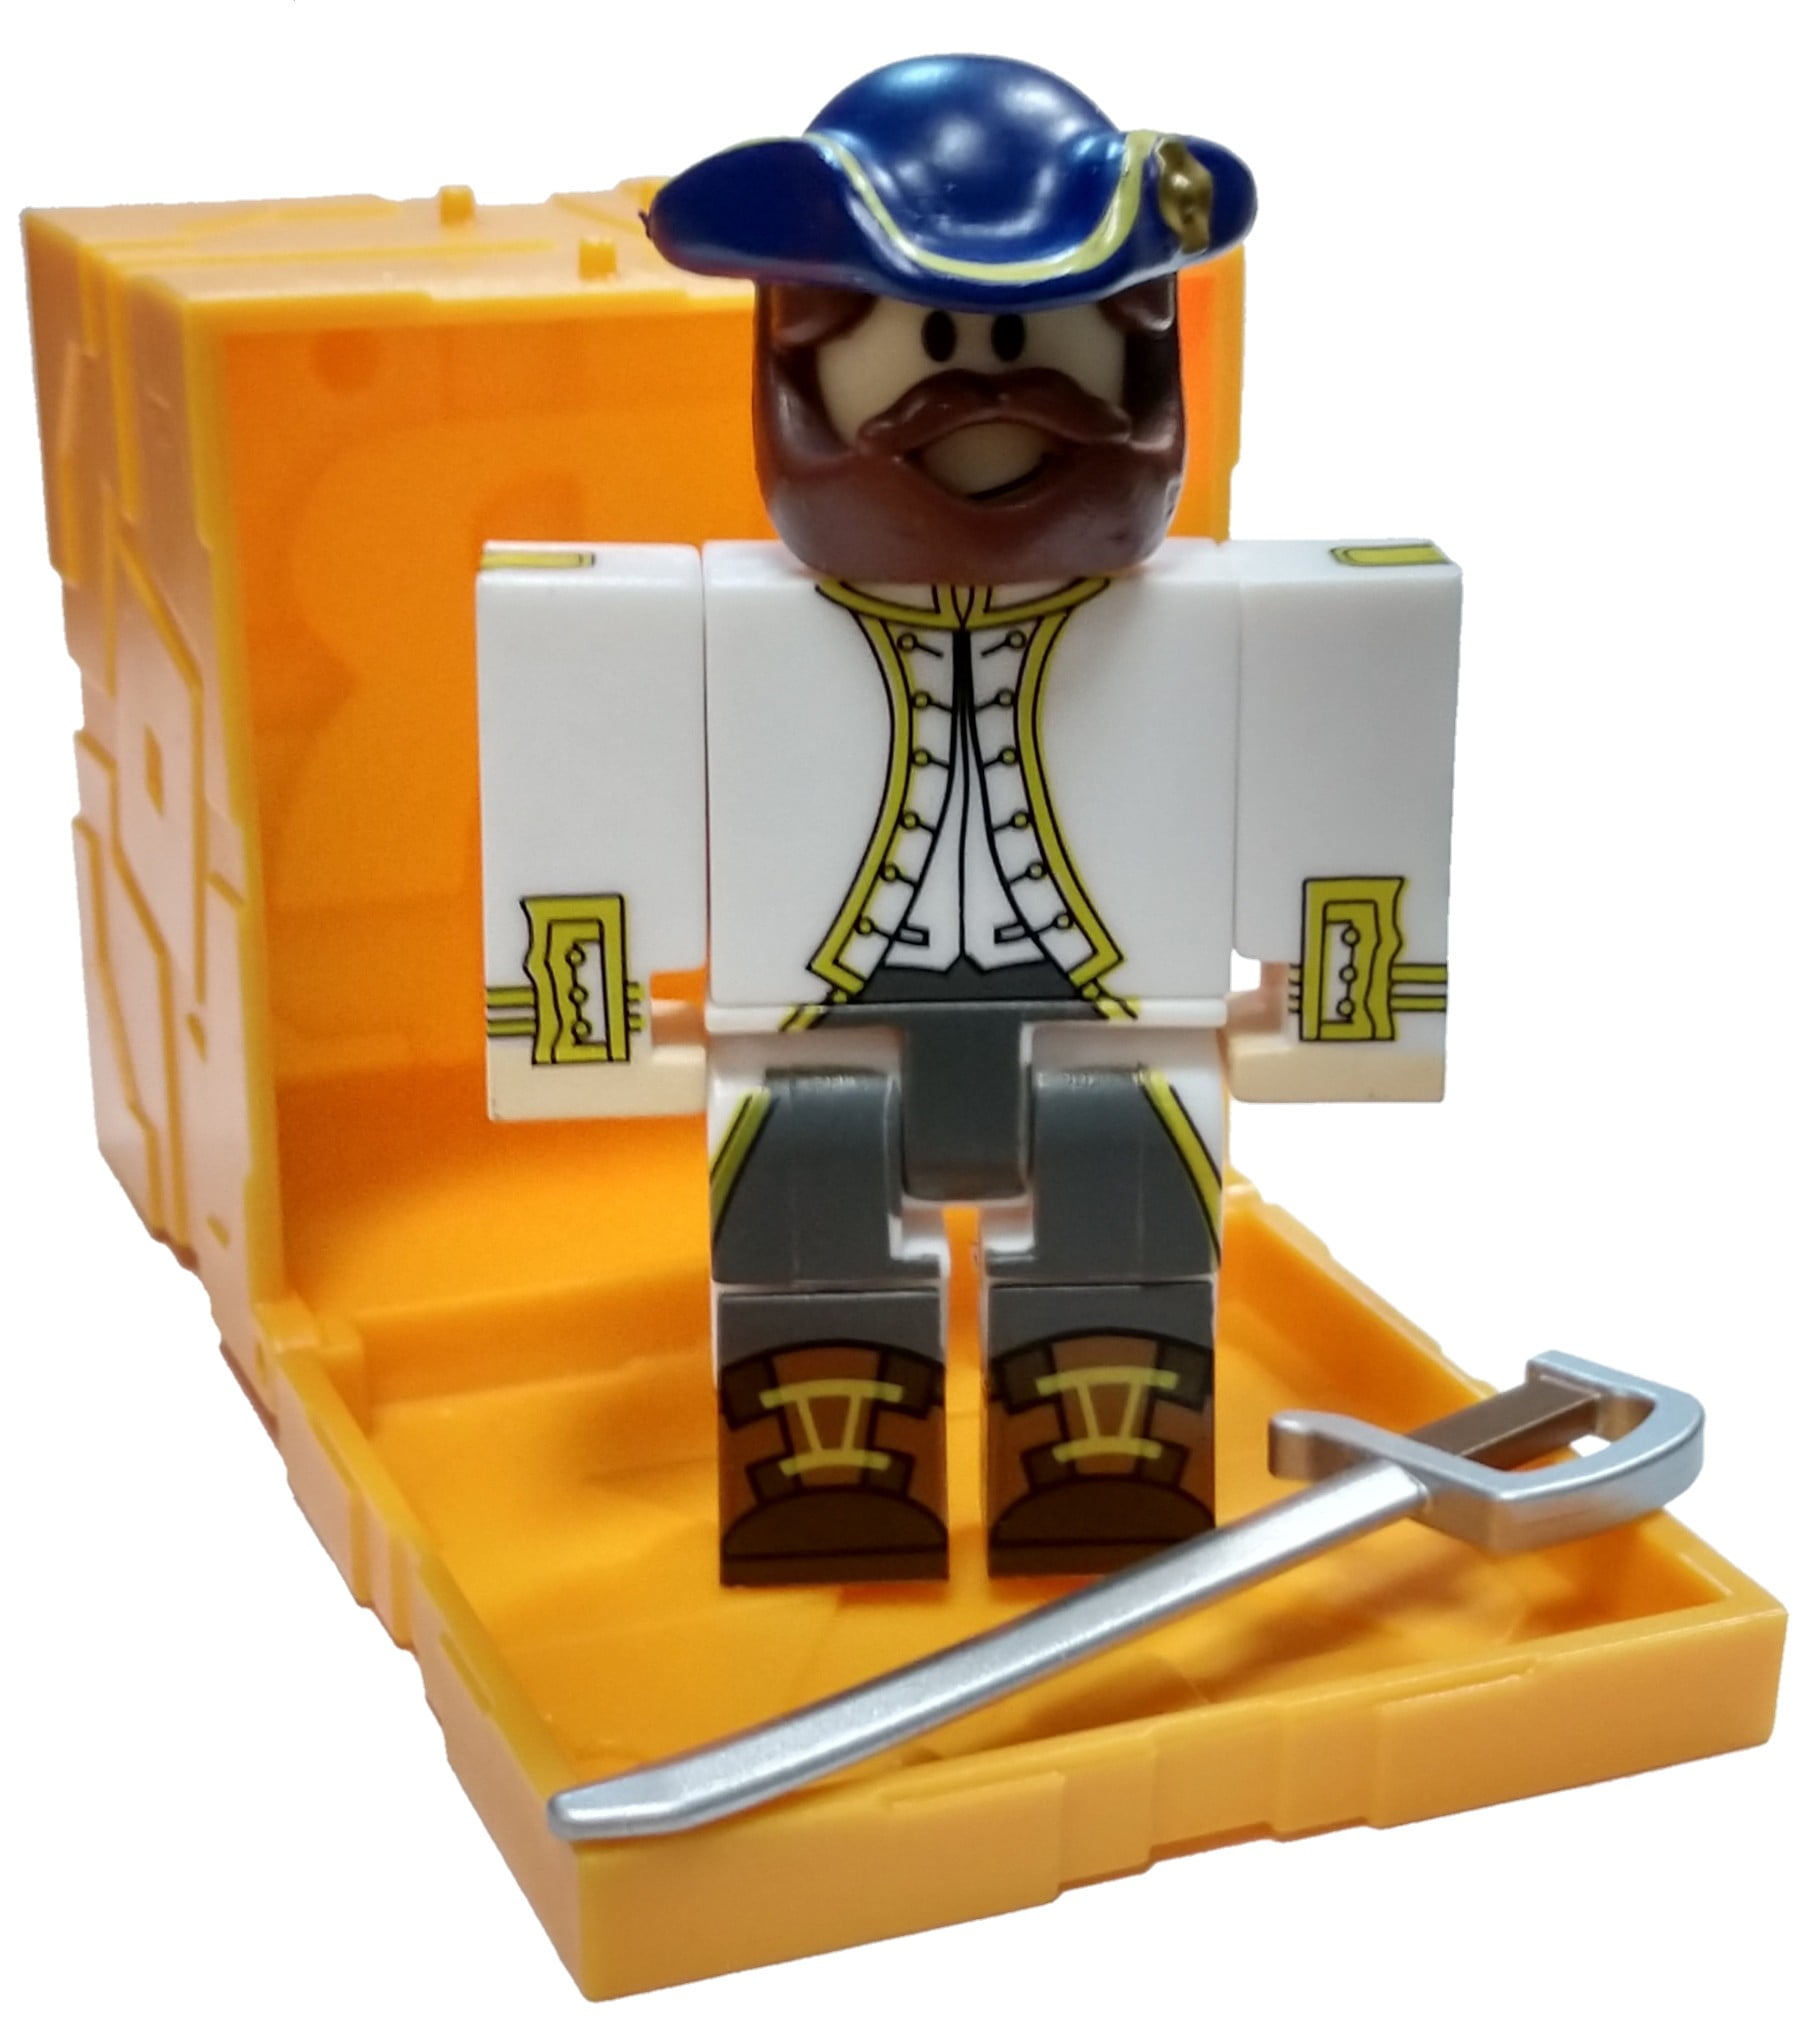 Roblox Series 5 Tradelands Whitecrest Admiral Mini Figure With Gold Cube And Online Code No Packaging Walmart Com Walmart Com - hamsters in the house roblox animal house pets online